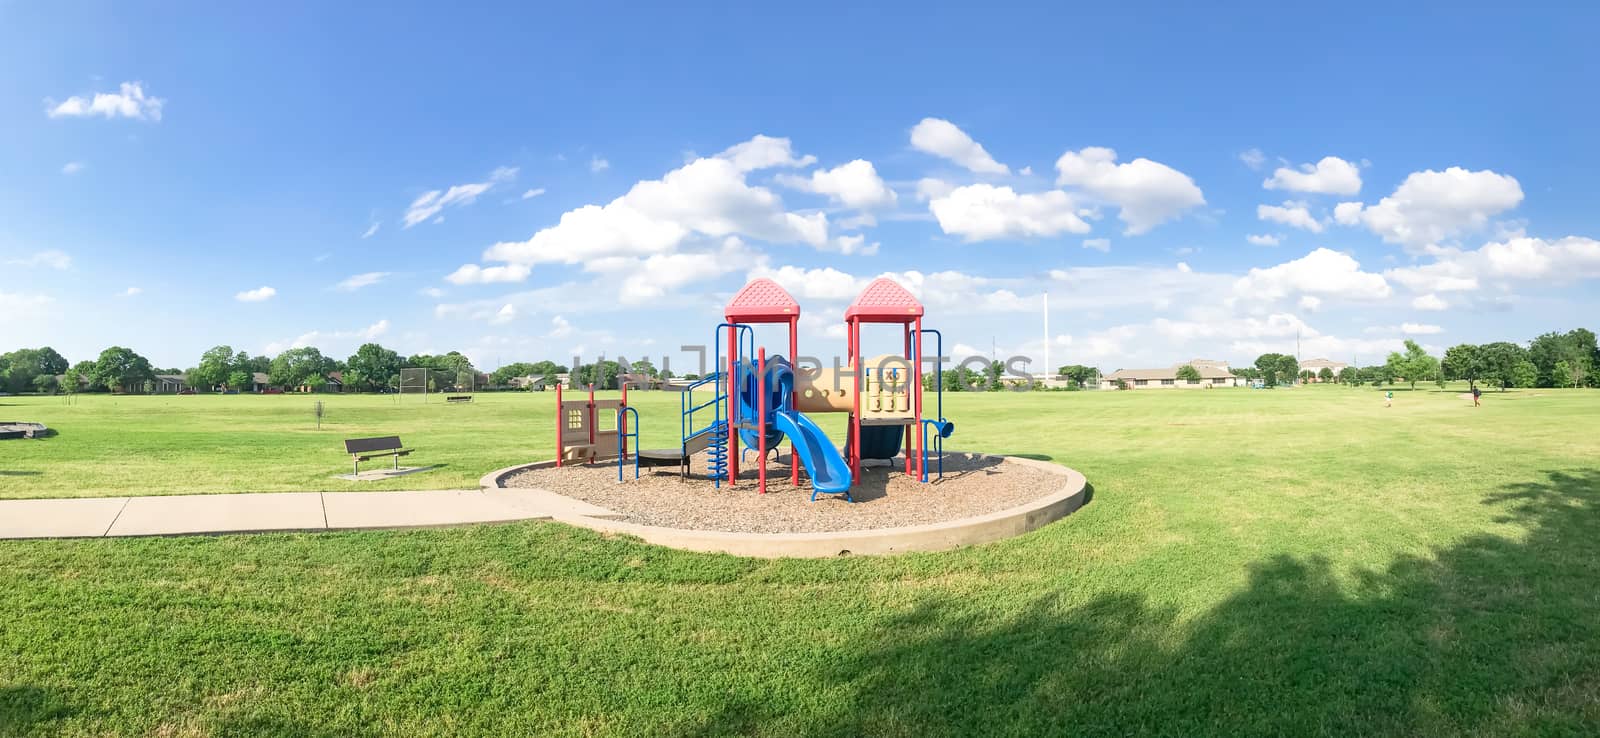 Panoramic public playground for kids at green park on sunny day in Texas, USA by trongnguyen